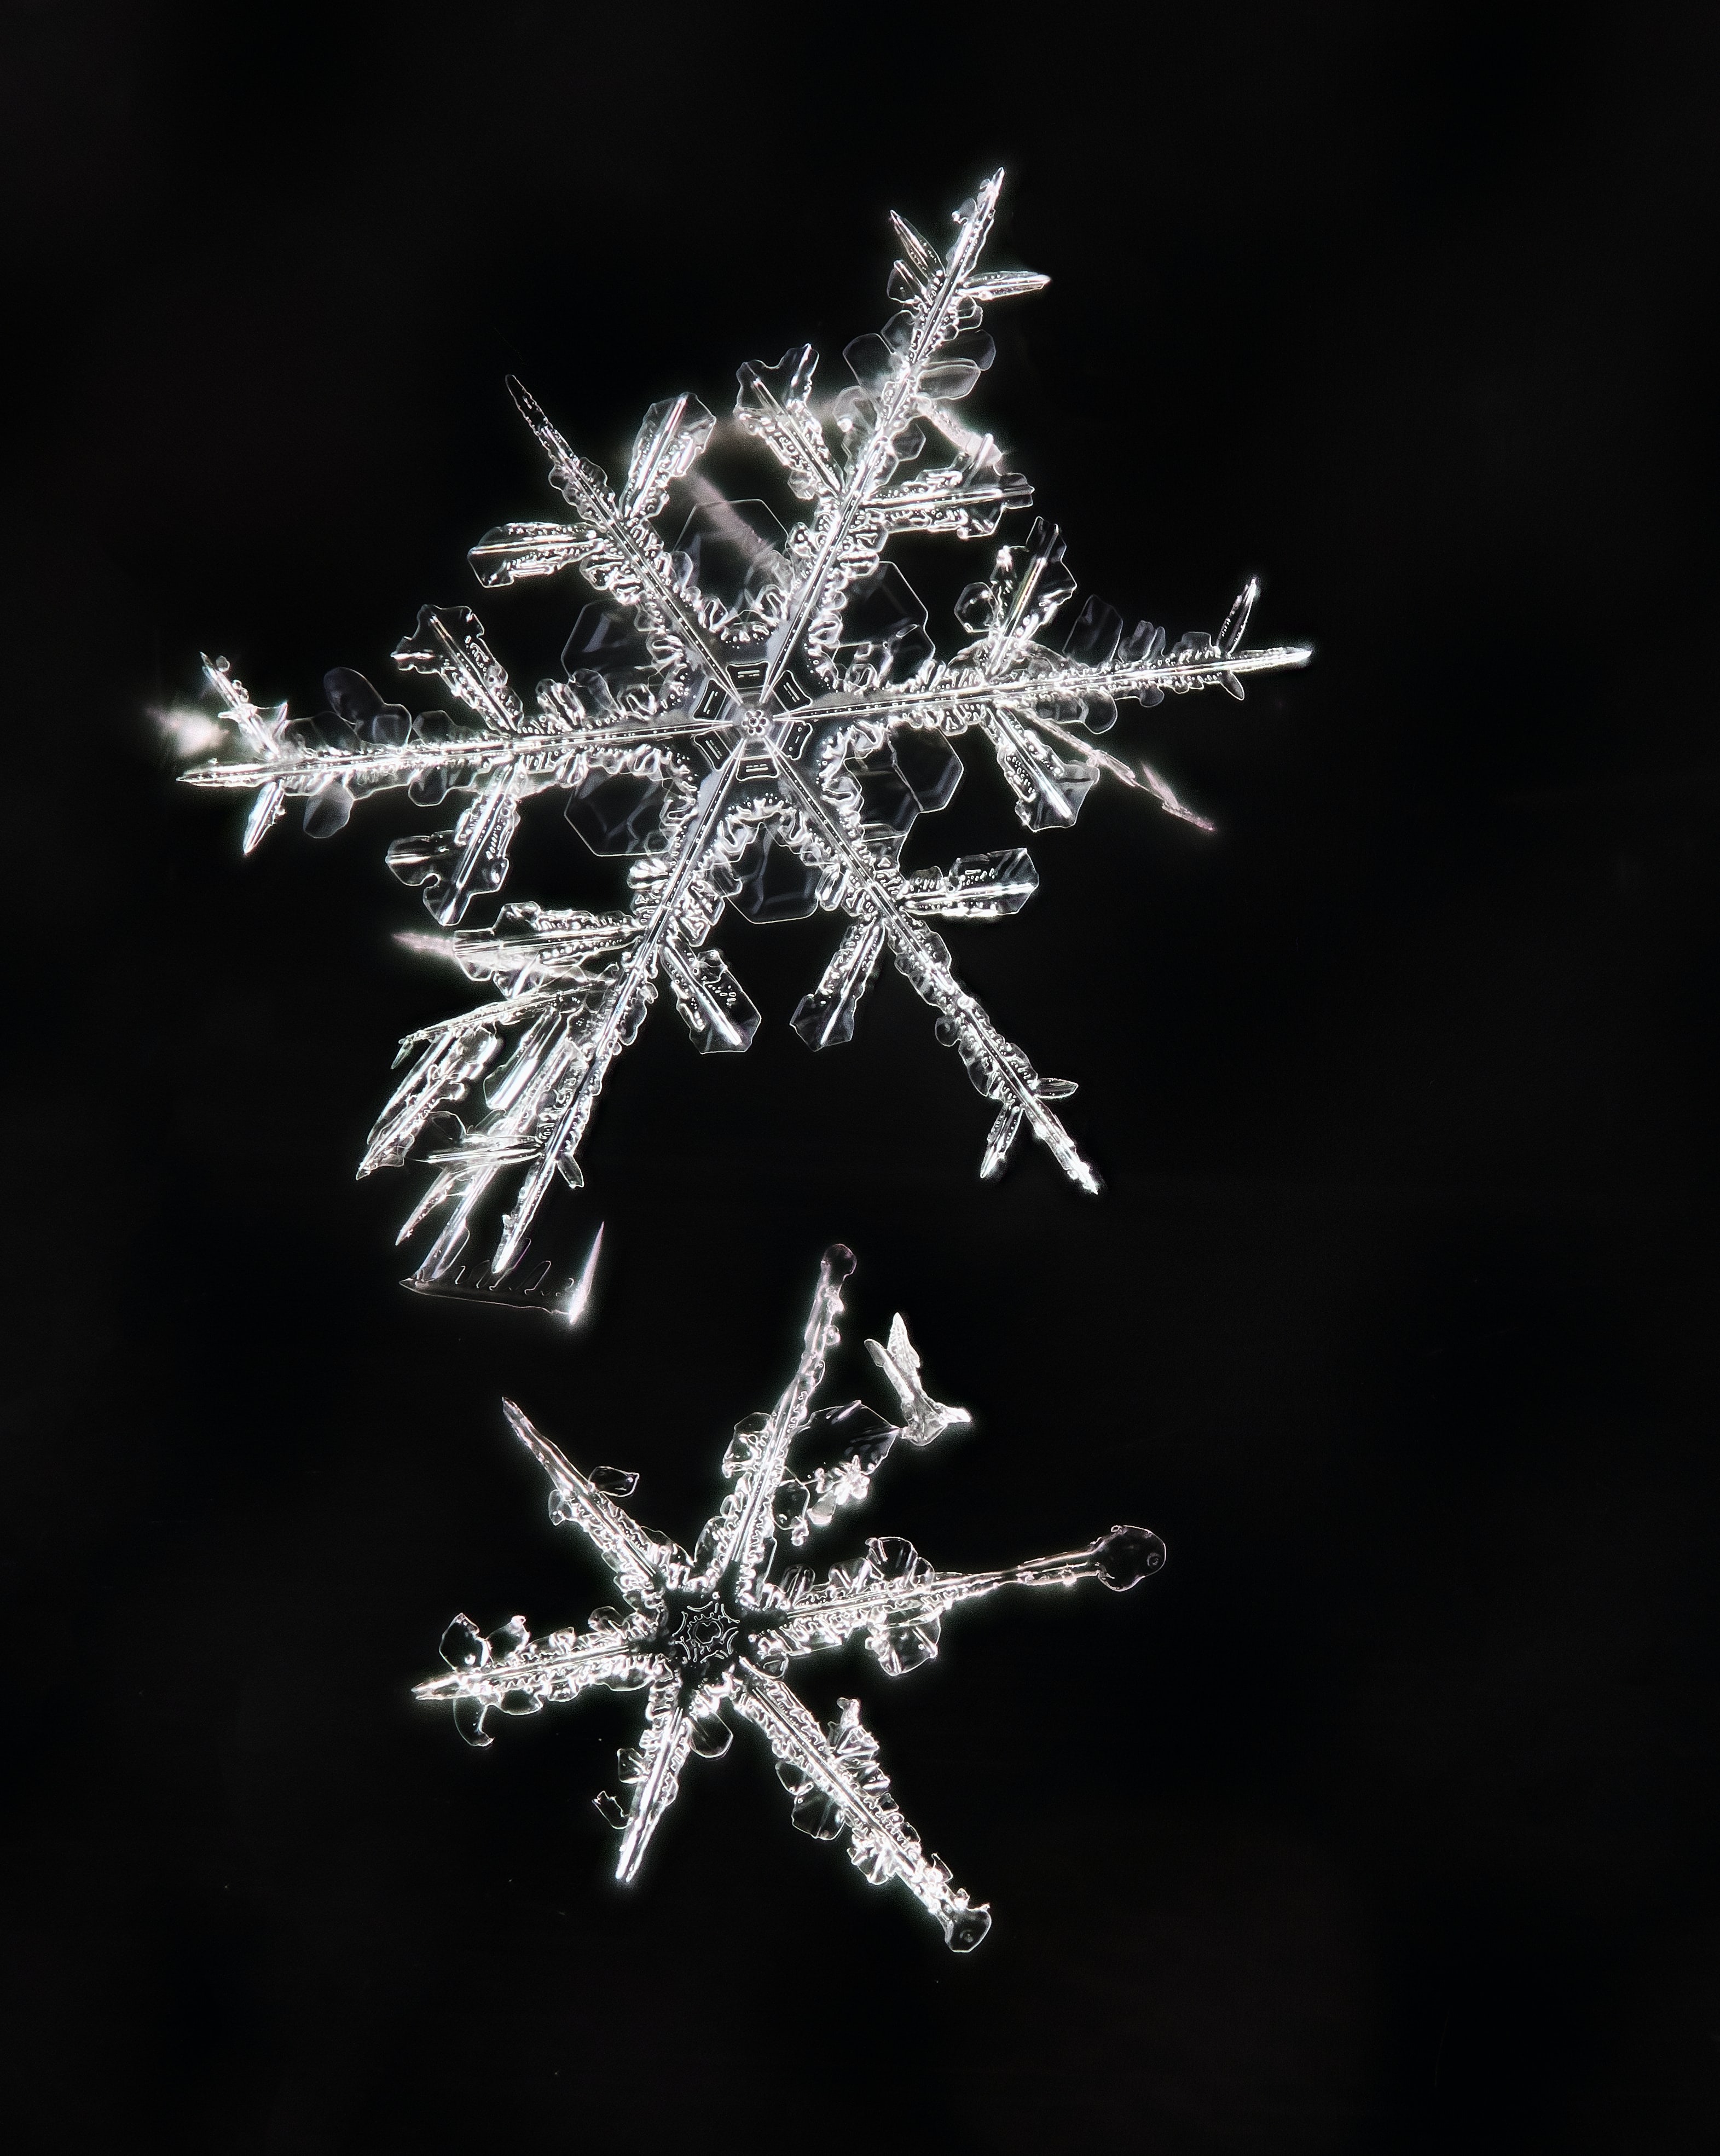 55921 download wallpaper ice, snowflakes, macro, pattern, crystal screensavers and pictures for free